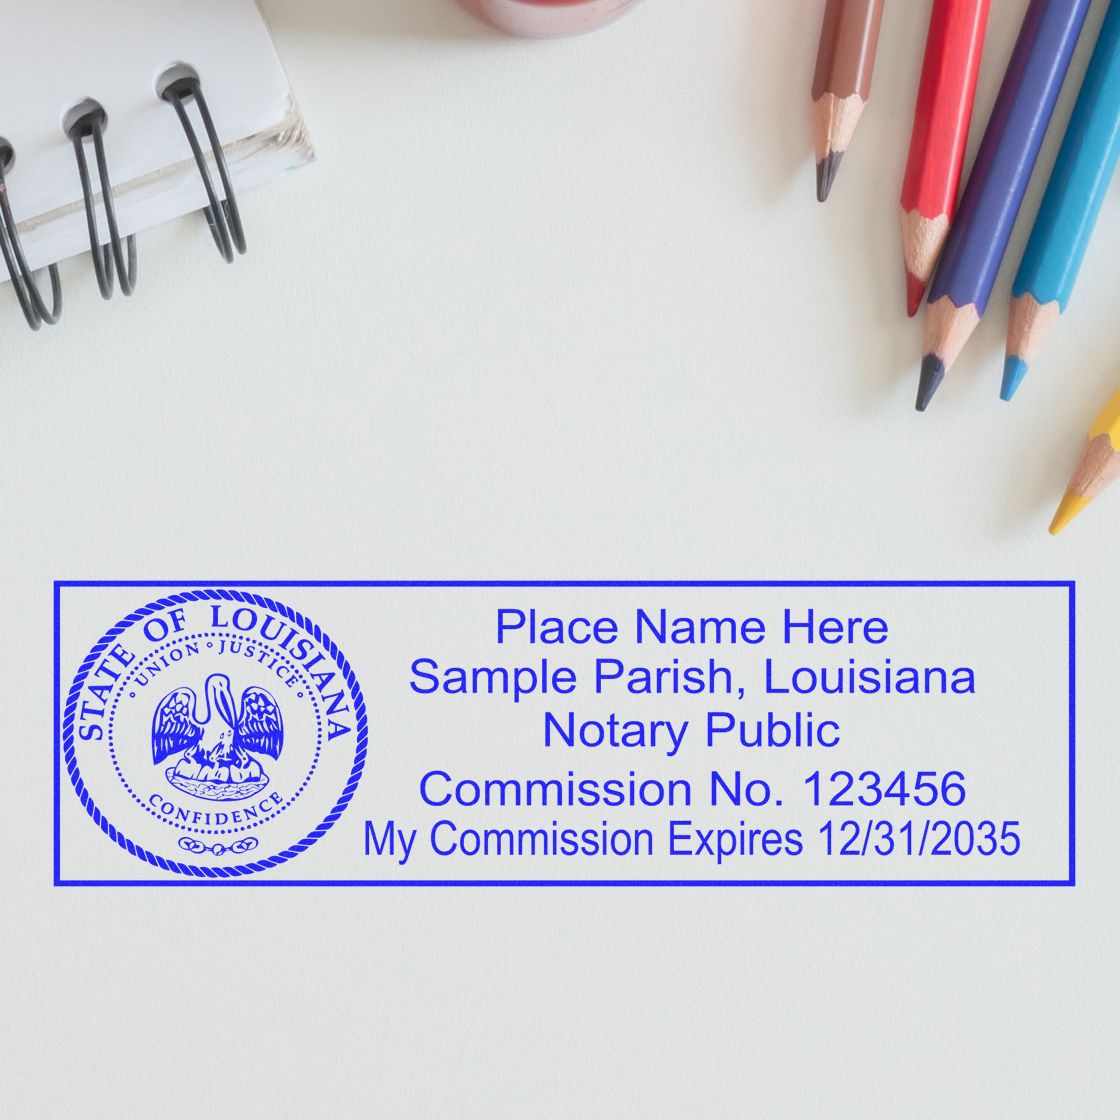 An alternative view of the Heavy-Duty Louisiana Rectangular Notary Stamp stamped on a sheet of paper showing the image in use